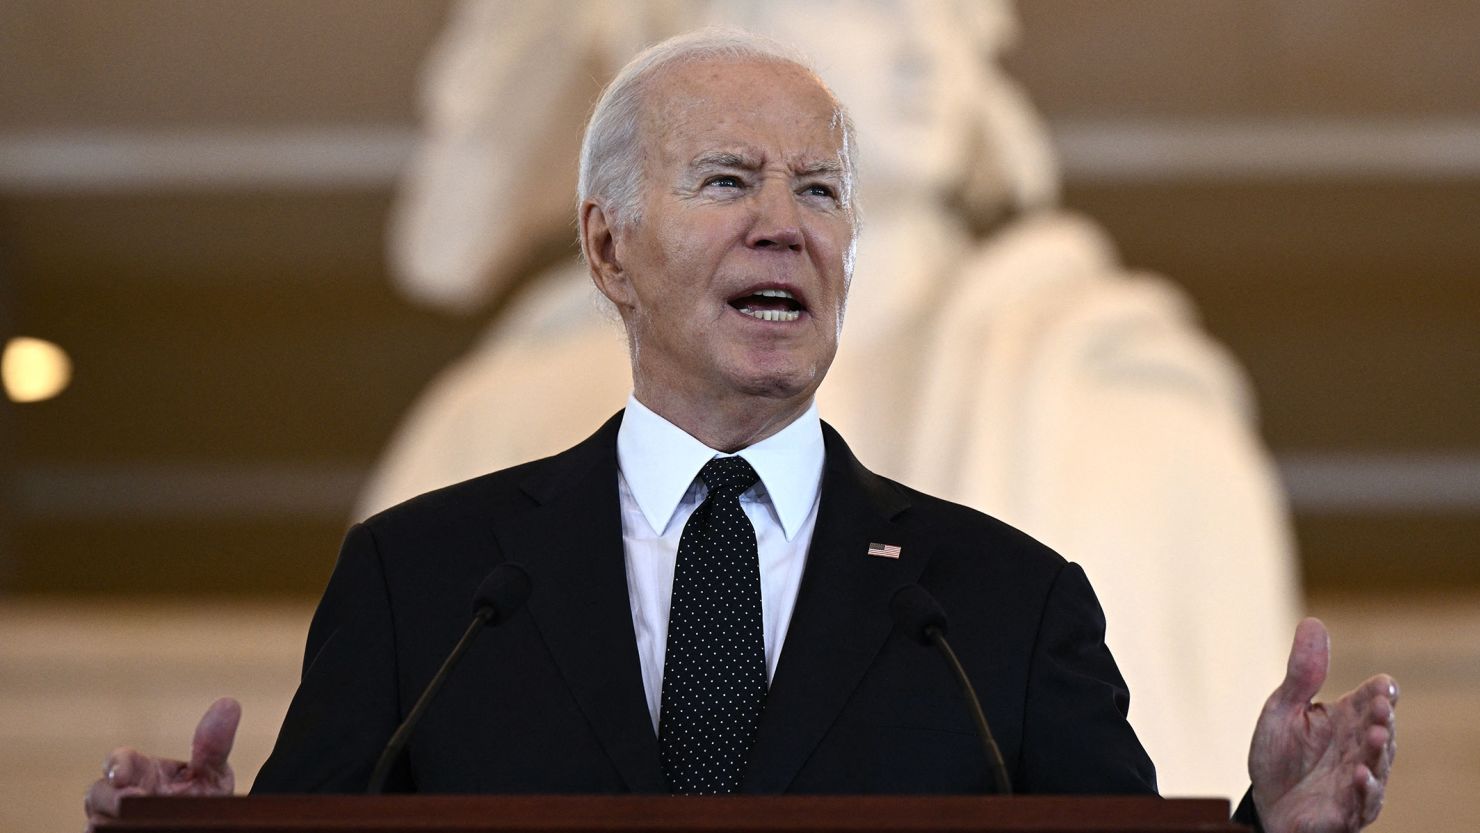 Biden Aims to Strengthen Worker and Consumer Influence Ahead of Election